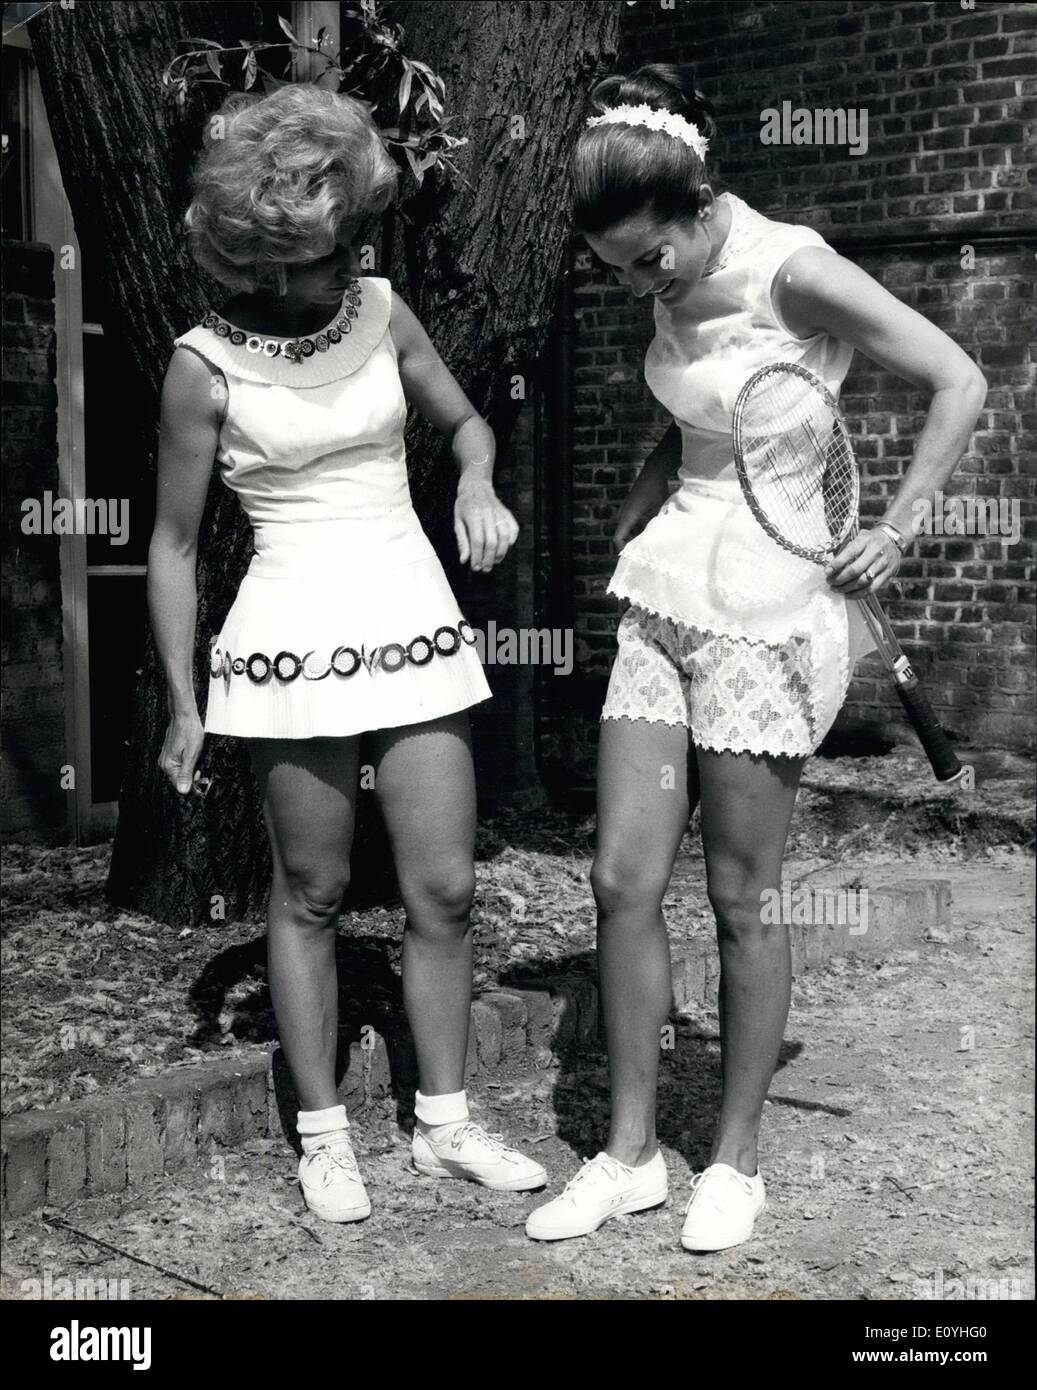 Jun. 06, 1970 - International Tennis stars model Teddy Tinlyng's New 1970 tennis designs.: Several international tennis stars were present at the Belvedore Restaurant in Holland Park. London, today, to model new tennis styles specially created by Teddy Training.: Photo shows Lea Pericoli, of Italy (left) is wearing a flaring shift-dress of 'Dacron' polyester with a fince pleated trim, with gold and pearl decorations, with Carol Ealogeropoulos, of Greece, wearing a see-through midi-dress covering a lace half-slip and bra and silver ''Dacron'' guipure shorts Stock Photo